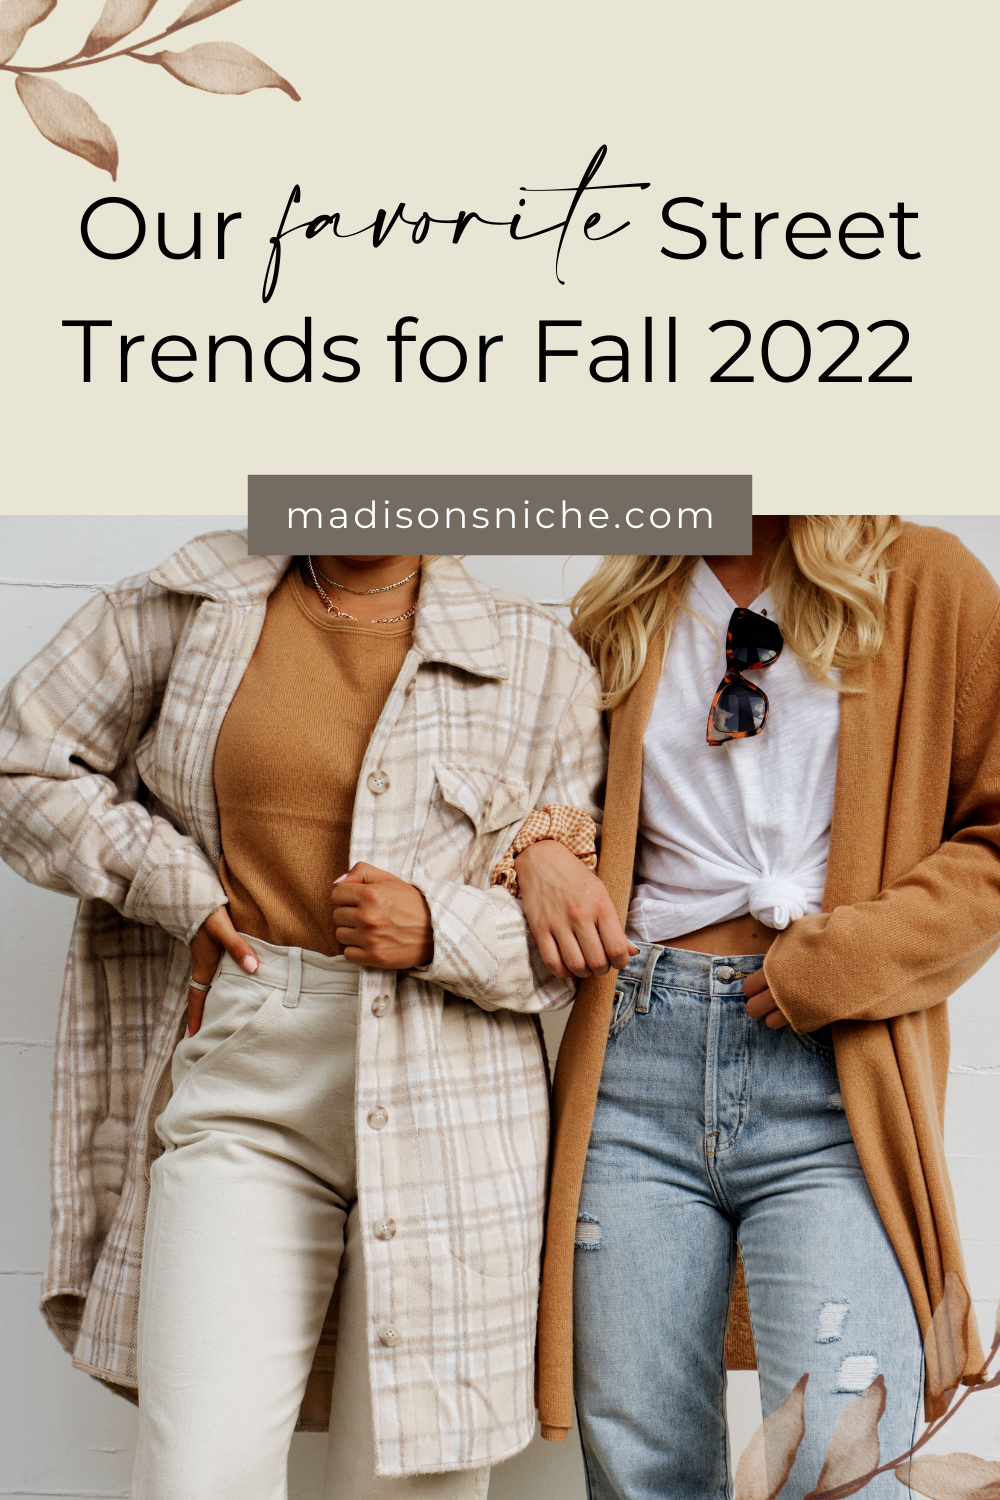 Our Favorite Street Trends for Fall 2022 That You NEED to Know